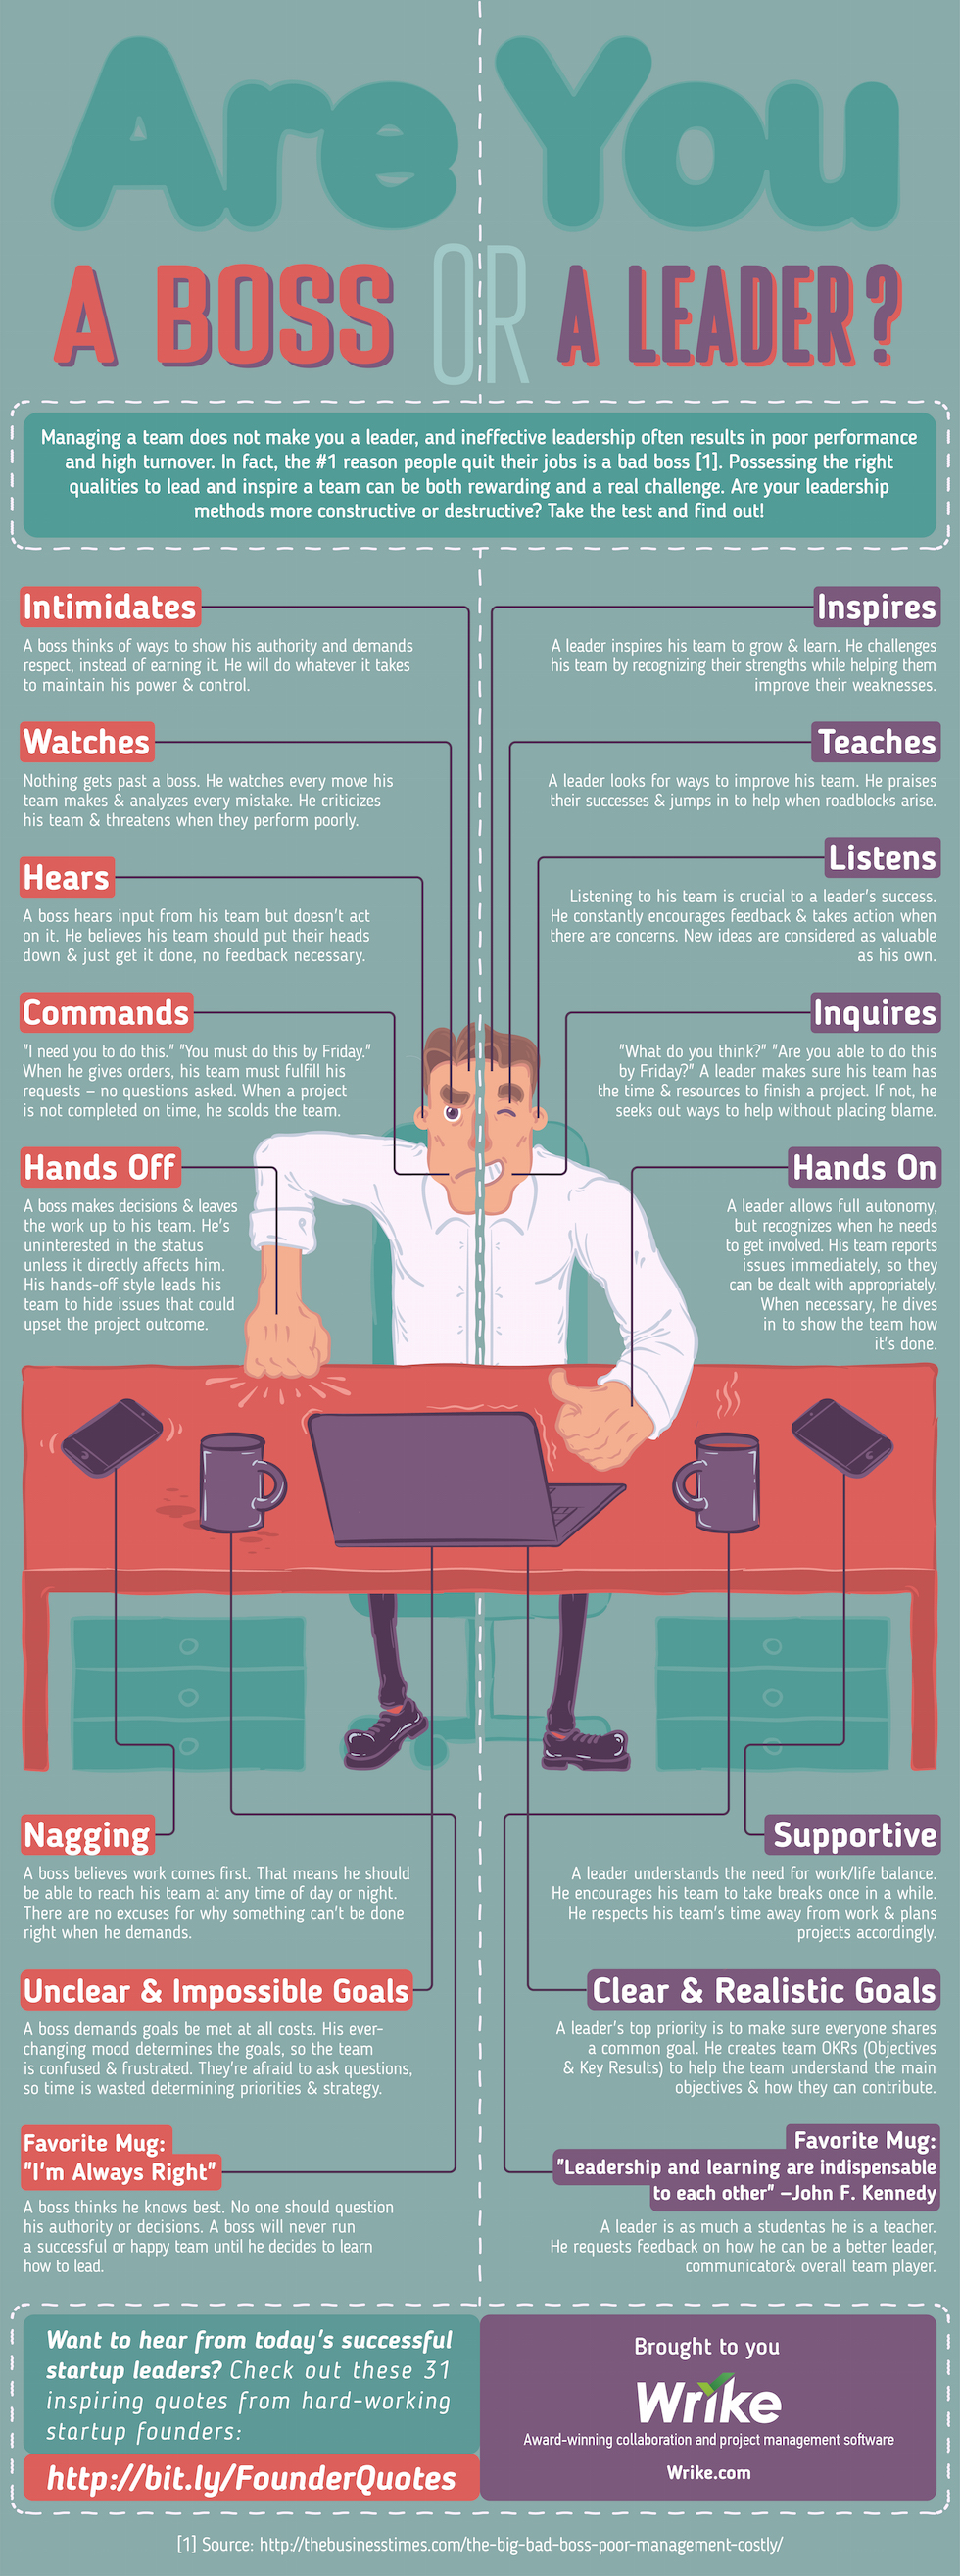 Infographic Anatomy of a Tech Startup Team